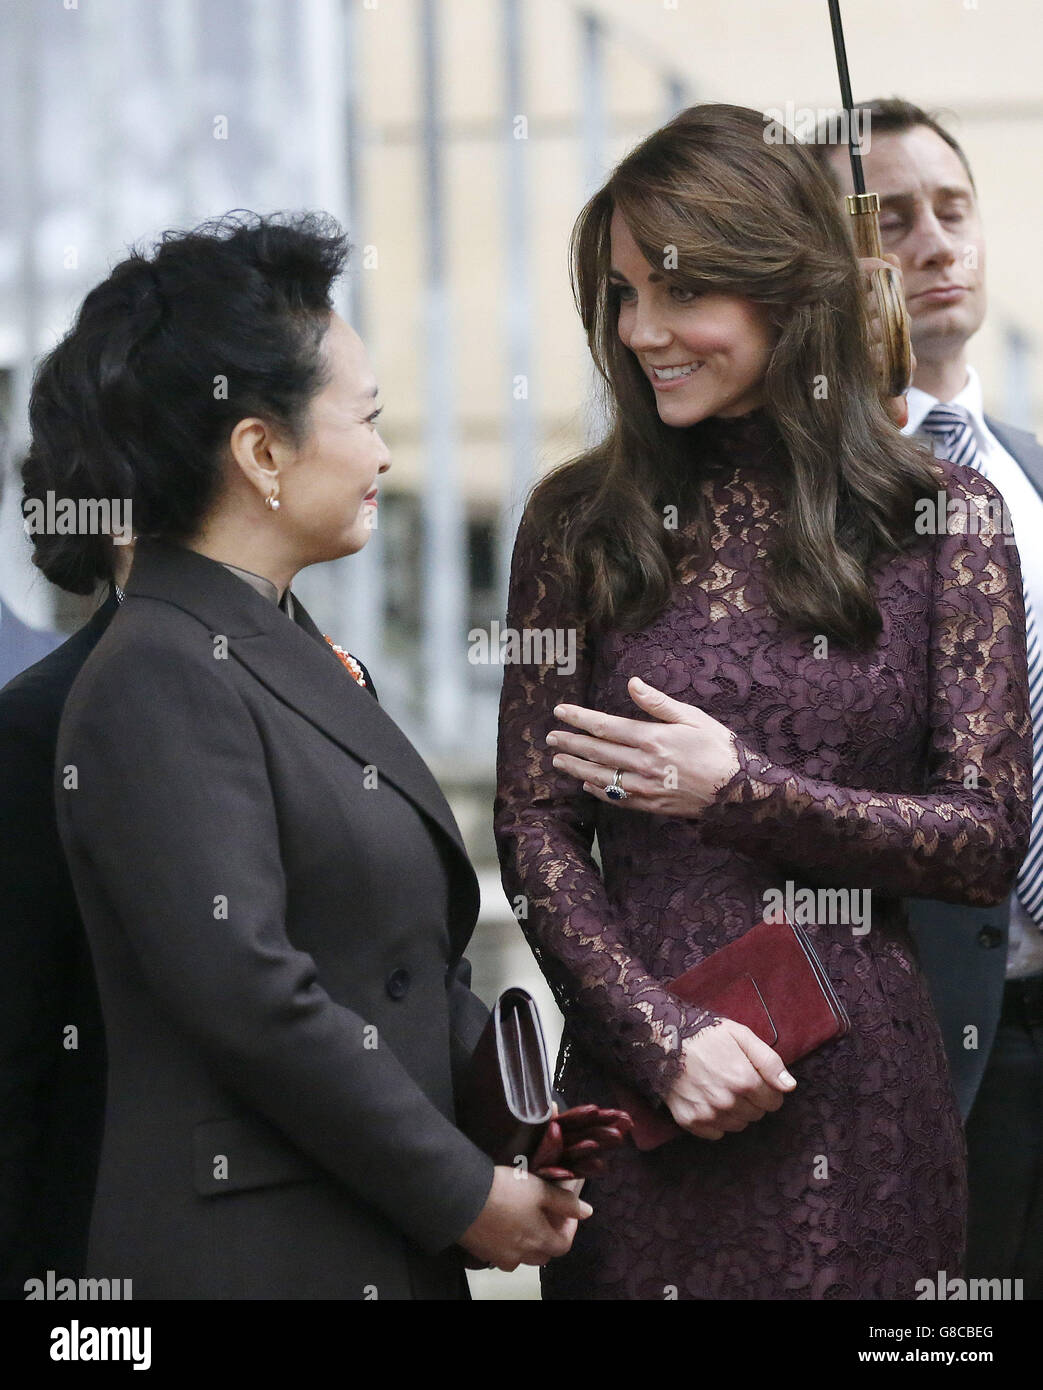 The Duchess of Cambridge with the wife of the President of China Peng Liyuan, at Lancaster House in London, where they were attending an event celebrating the cultural collaboration, existing and future, between the UK and China. Stock Photo